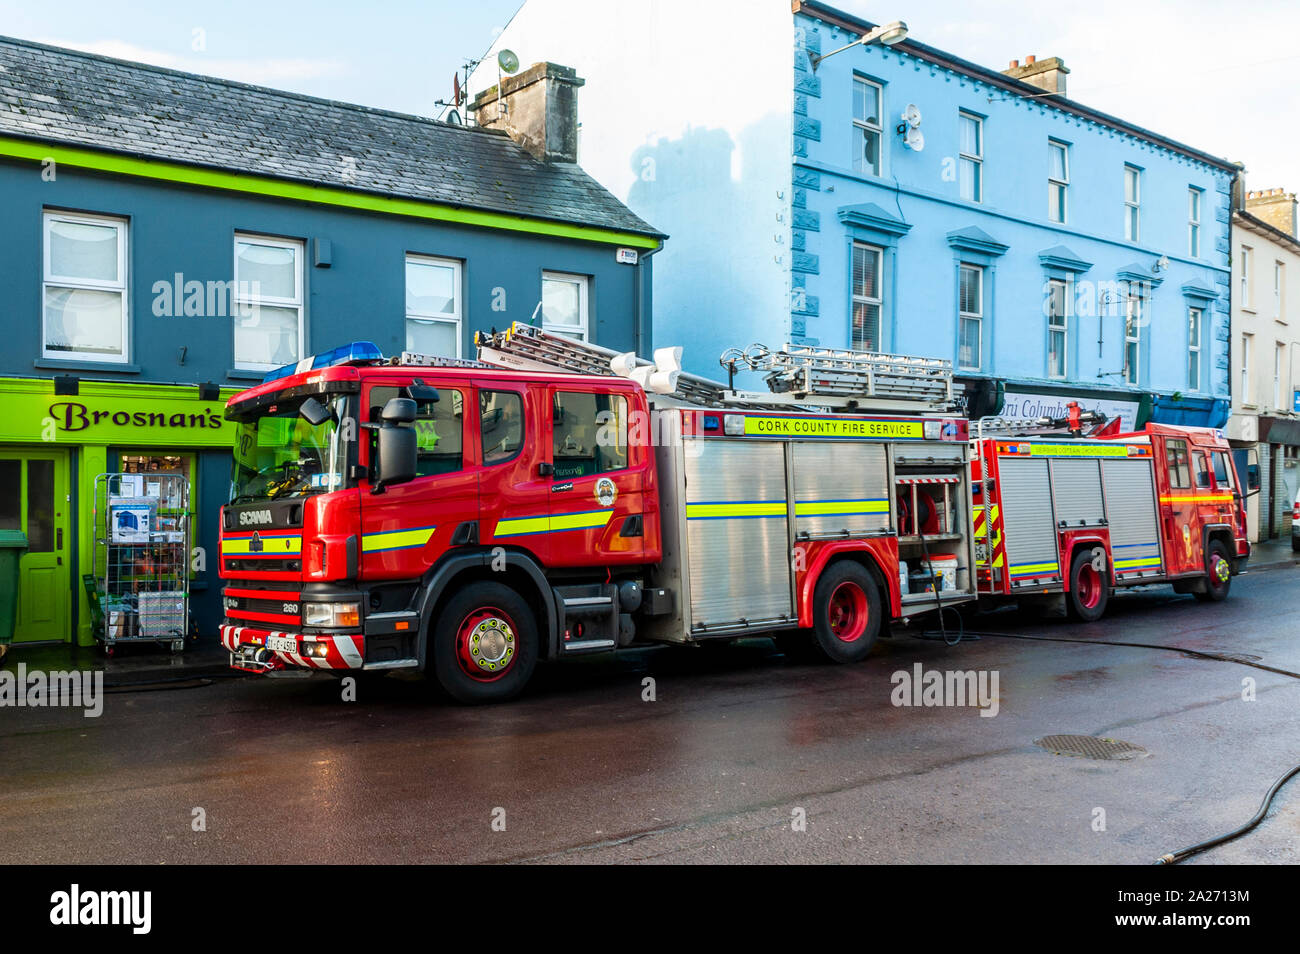 Schull, West Cork, Ireland. 1st Oct, 2019. Shops in Schull Main Street were hit badly by muddy flood waters this morning. At approximately 4am, drains in the street couldn't handle any more torrential rain and, due to being blocked with leaves and silt, overflowed causing a number of shops to flood. Schull Fire Brigade was in attendance from early morning. Credit: Andy Gibson/Alamy Live News. Stock Photo